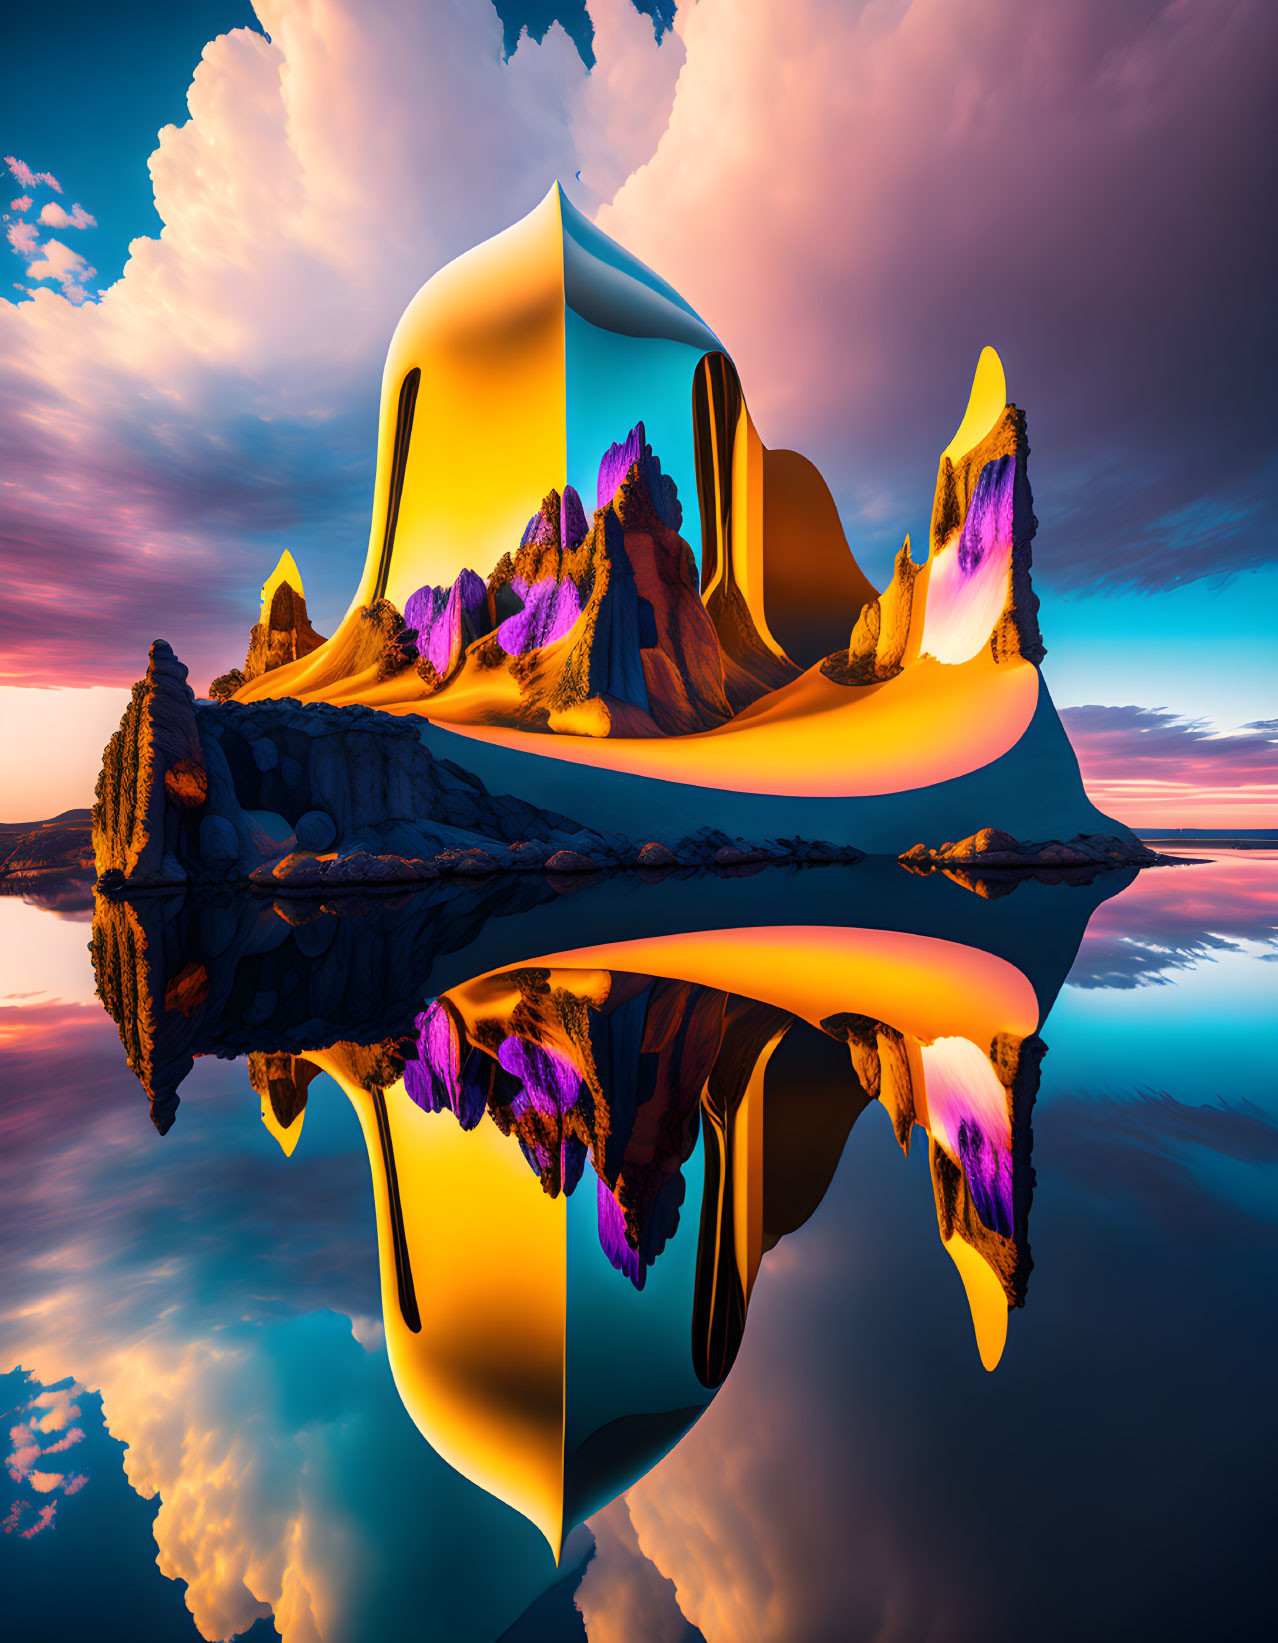 Mirrored mountains and water in surreal landscape at sunset